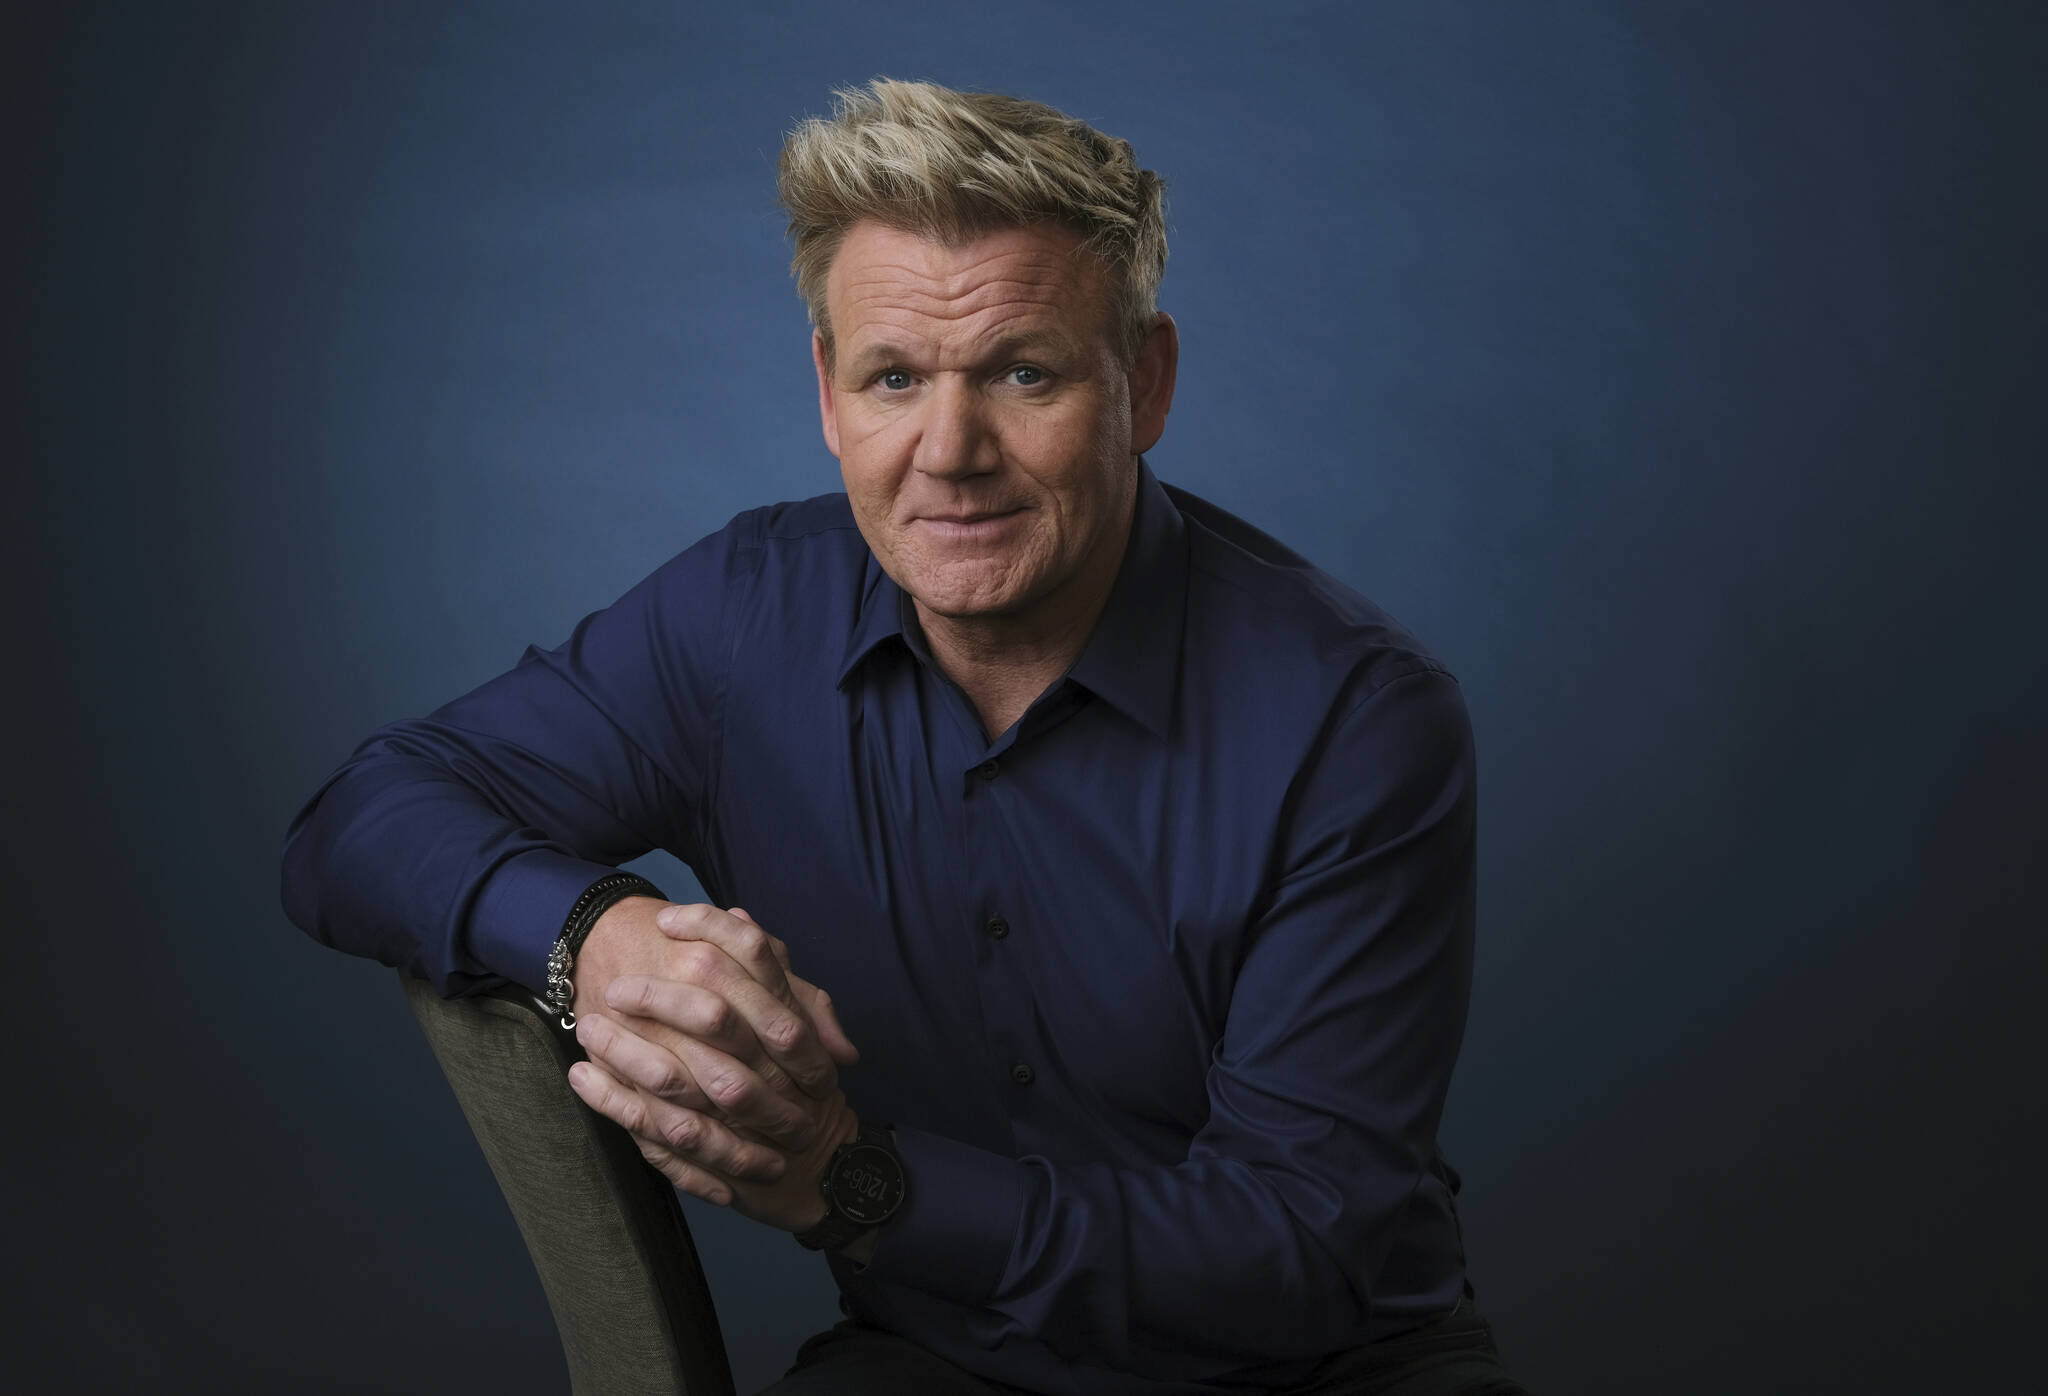 FILE - Chef and TV personality Gordon Ramsay posing for a portrait in Beverly Hills, Calif., on This July 24, 2019. Ramsay’s new competition series “Gordon Ramsay’s Food Stars” will debut this fall. (Photo by Chris Pizzello/Invision/AP, File)